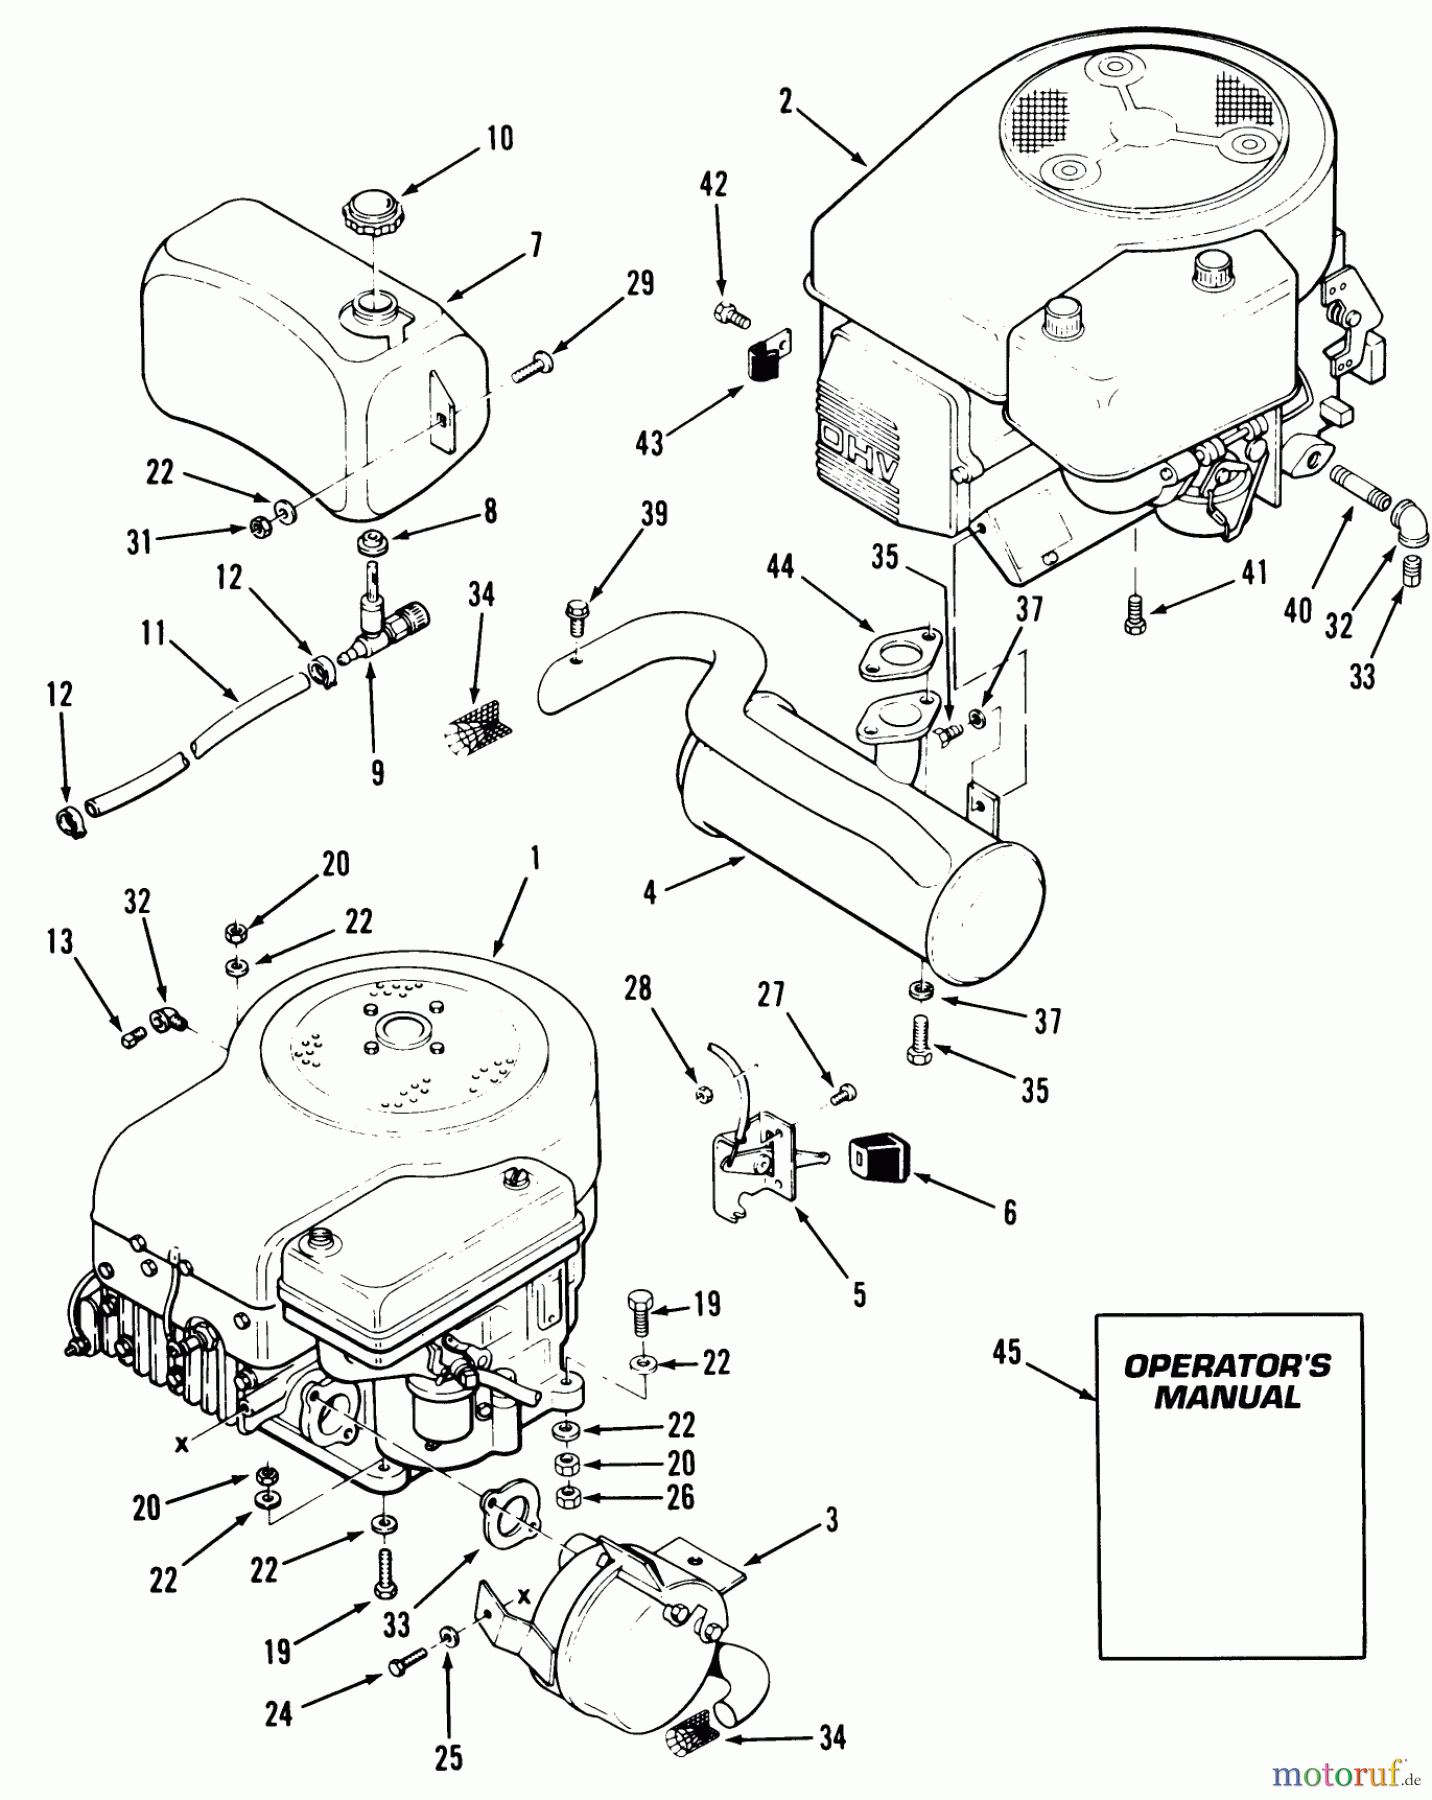  Toro Neu Mowers, Lawn & Garden Tractor Seite 1 32-12OE03 (212-H) - Toro 212-H Tractor, 1992 (2000001-2999999) ENGINE FUEL & EXHAUST ASSEMBLY